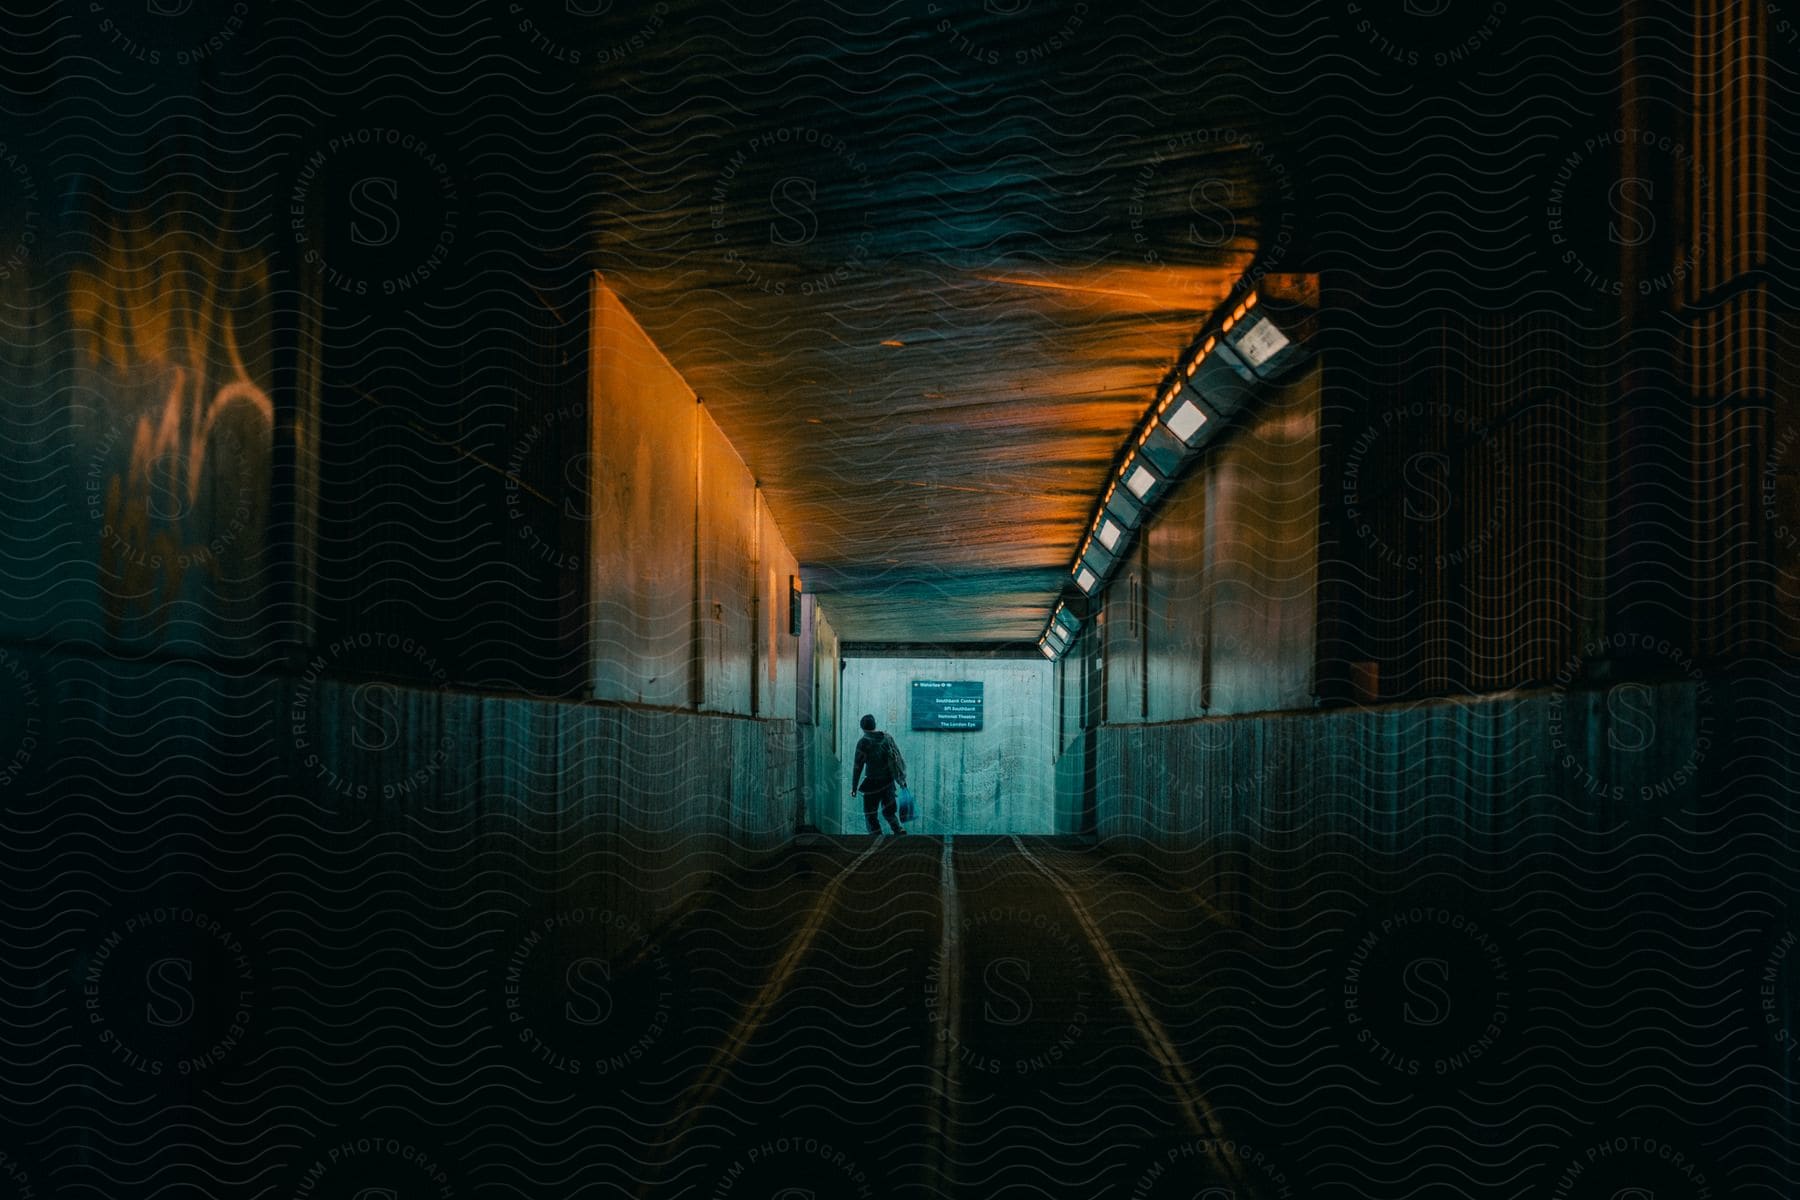 A man is turning the corner to leave at the far end of a dimly lit pedestrian tunnel